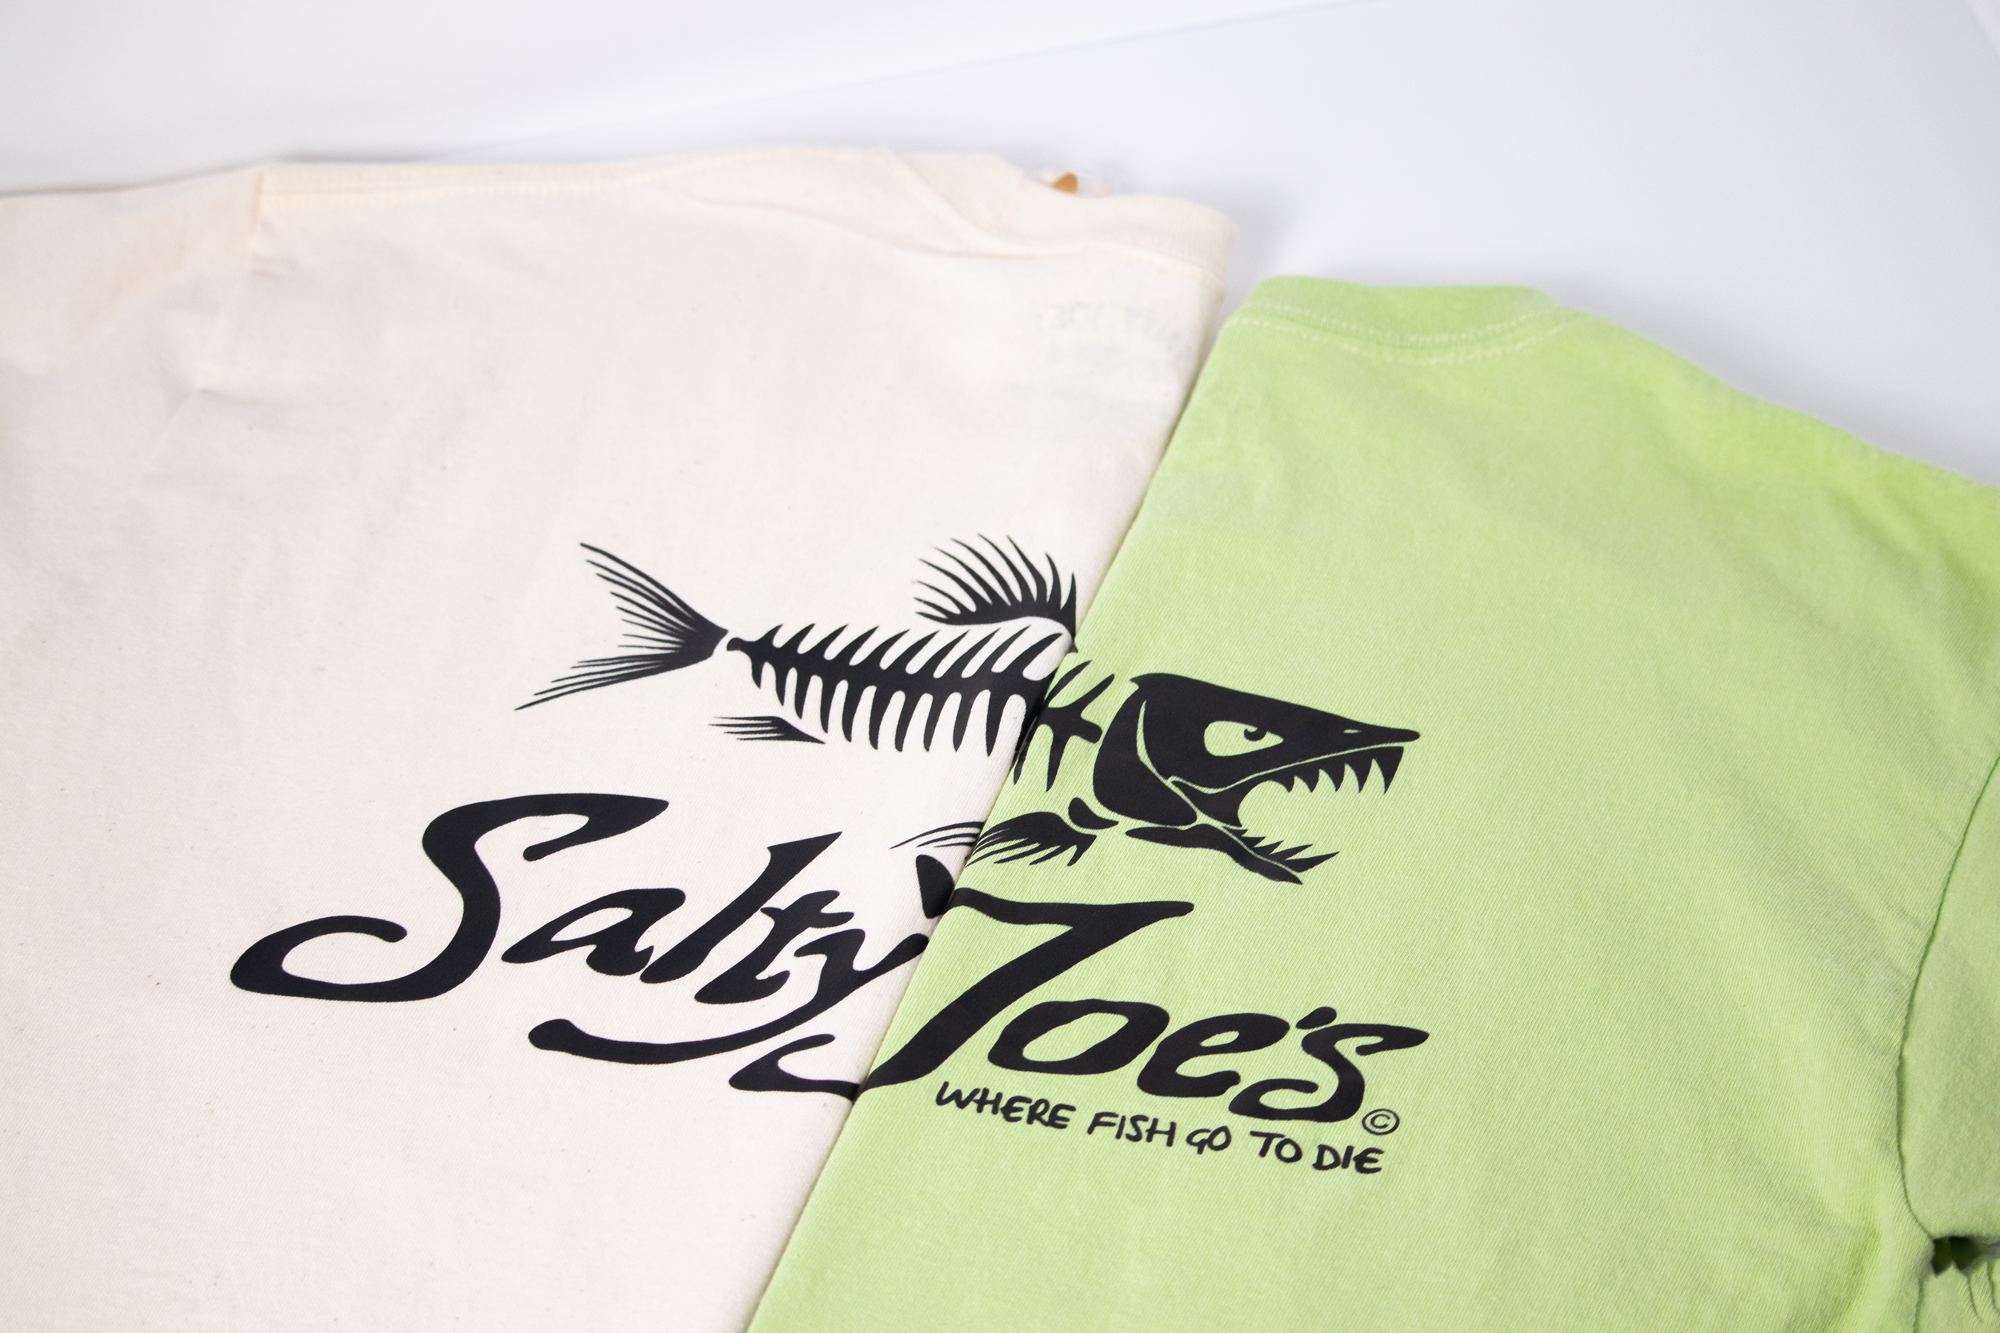 This is a cool picture of two of our favorite fishing t shirts.